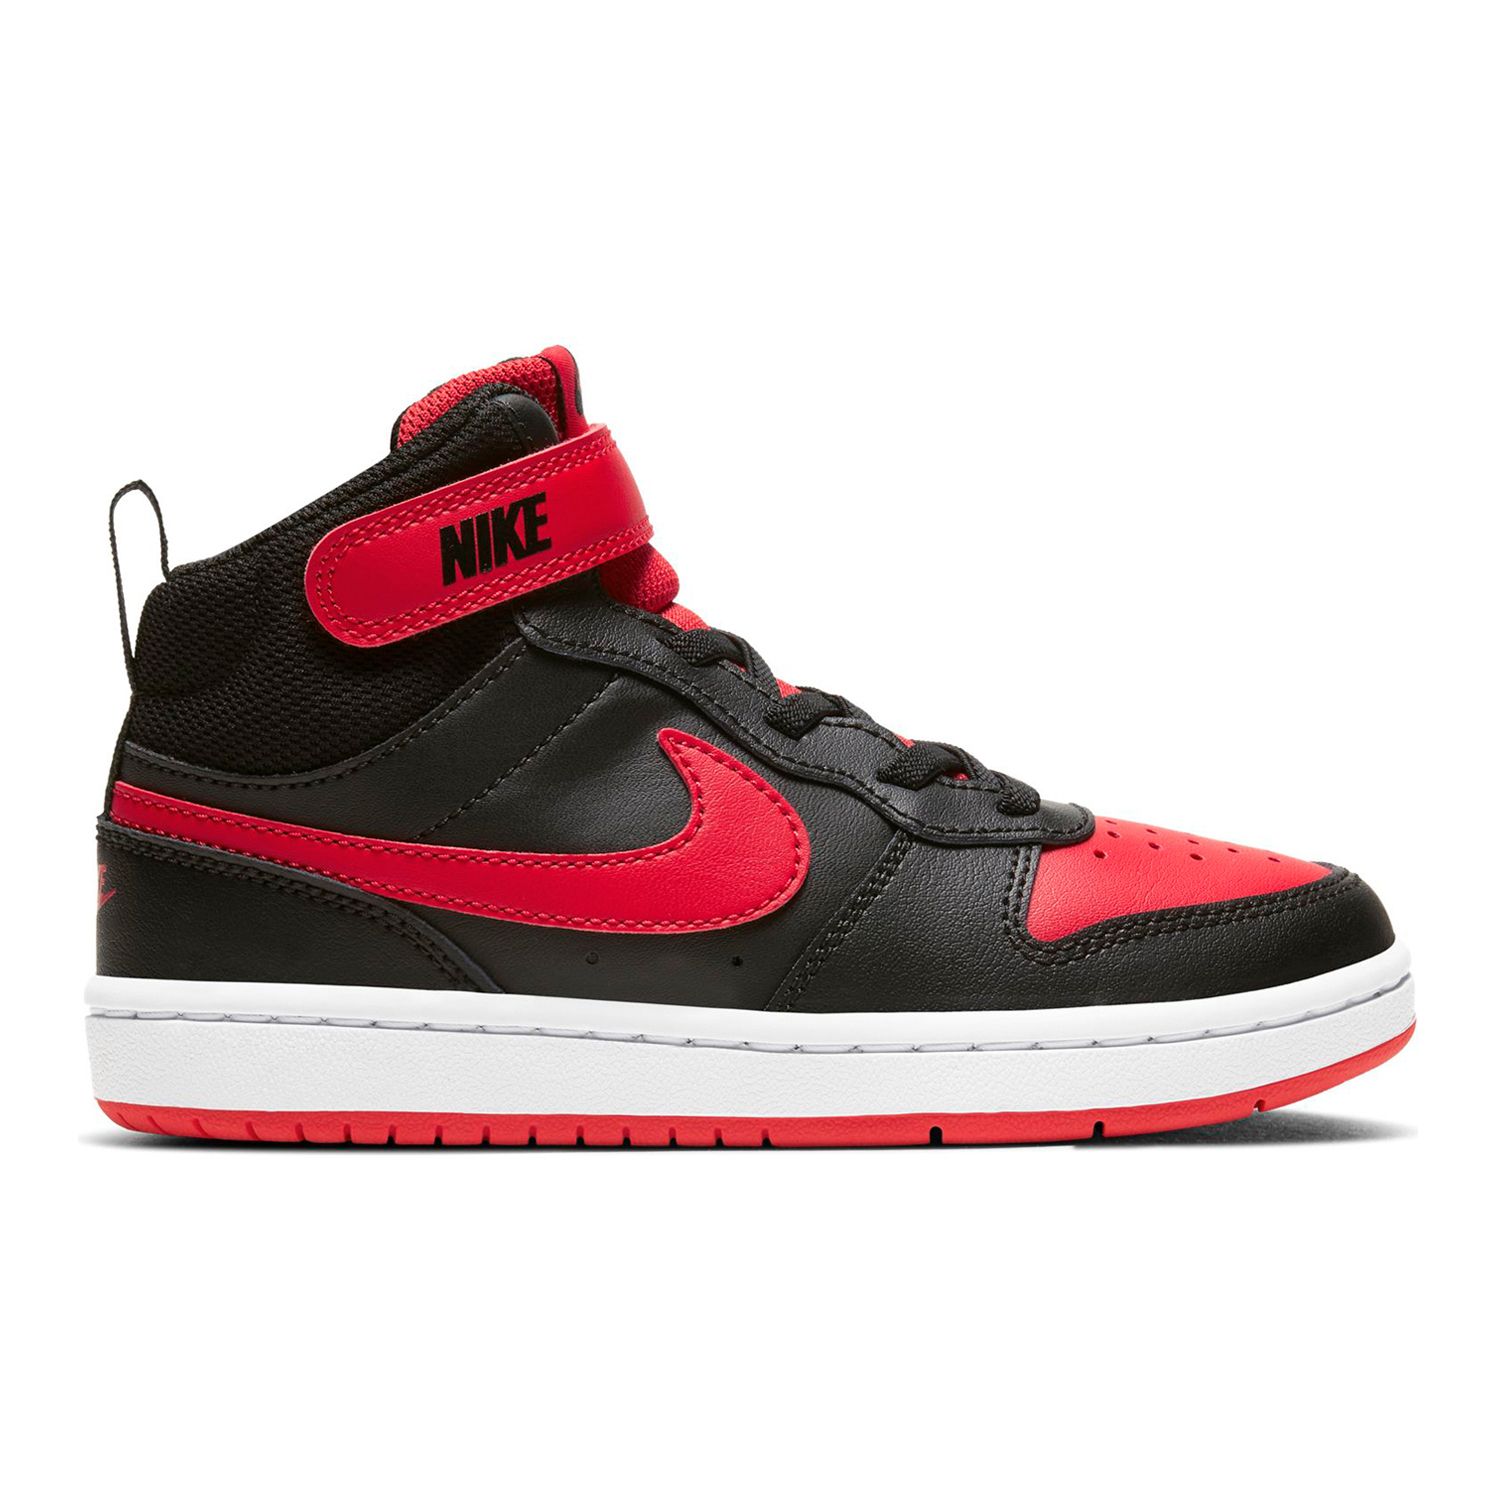 red and black nike shoes high tops